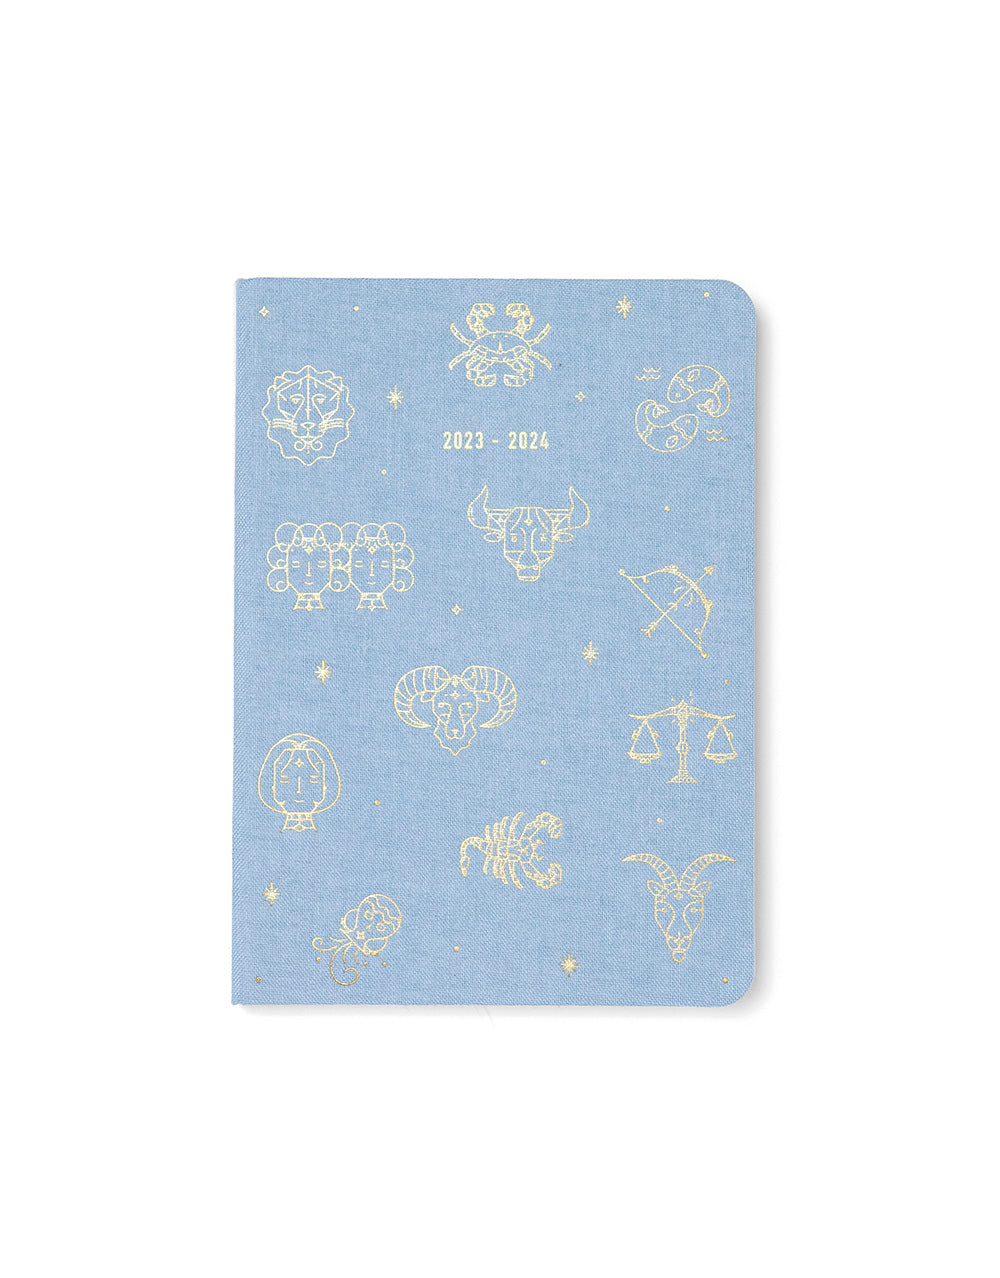 Zodiac A6 Diary 2023-2024 | Week to View Diary | Letts of London